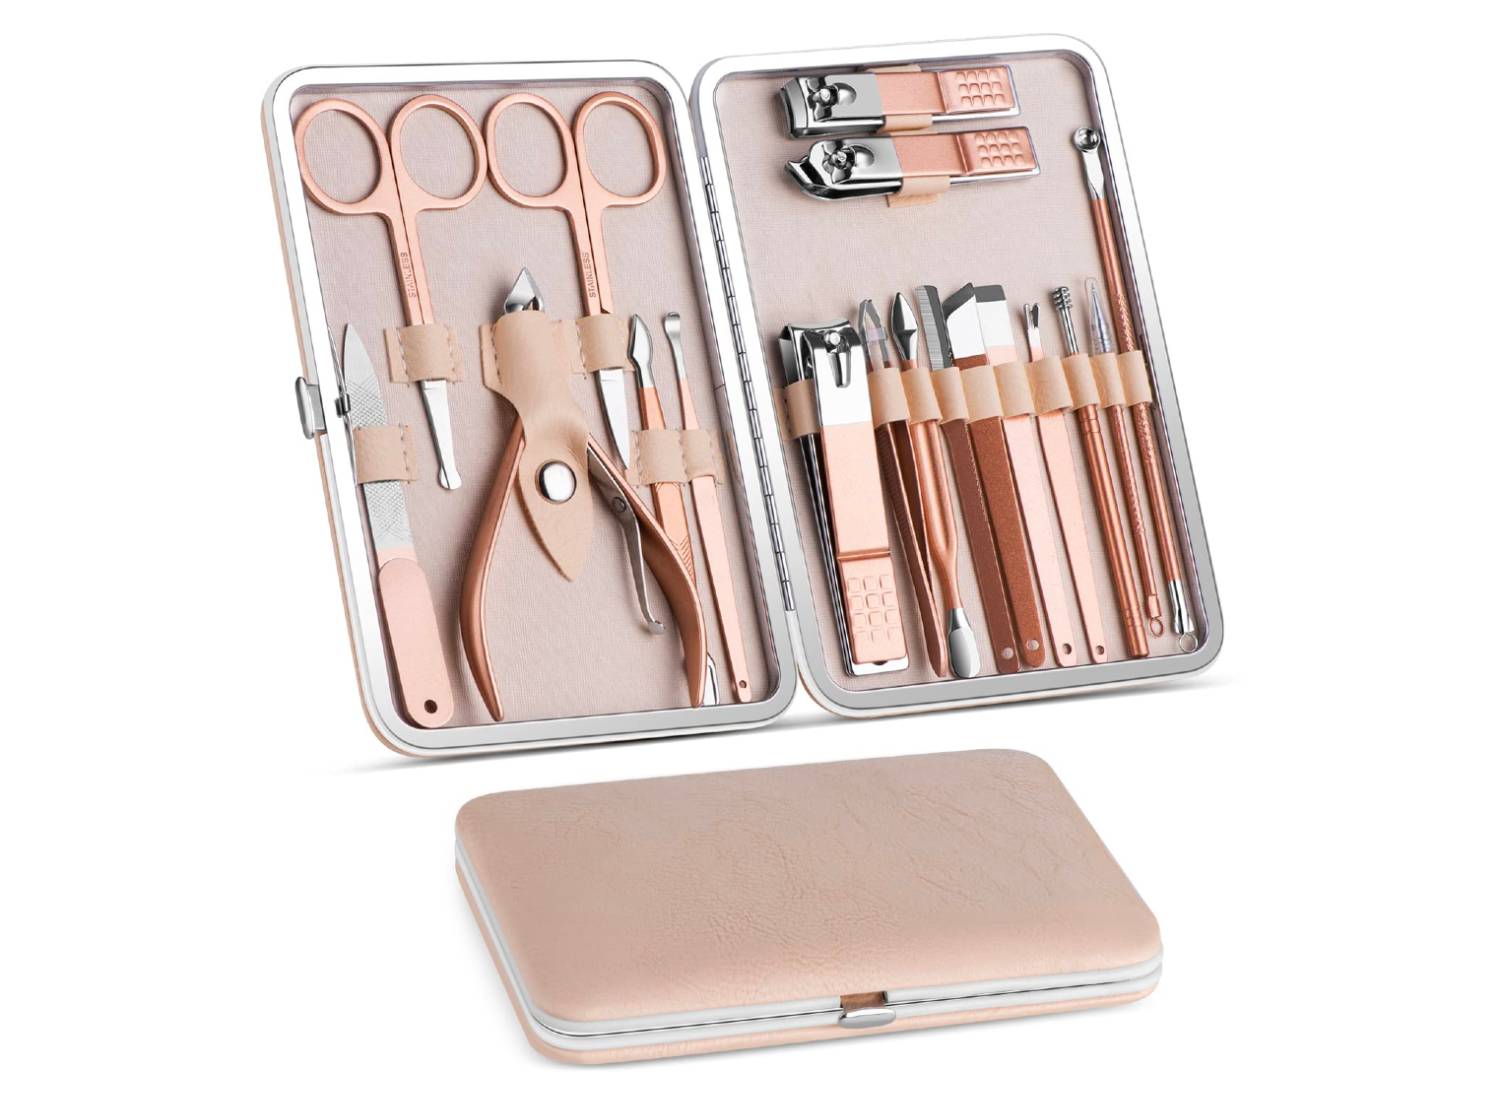 Rose gold Vabogu manicure set with 18 different tools in a carrying kit